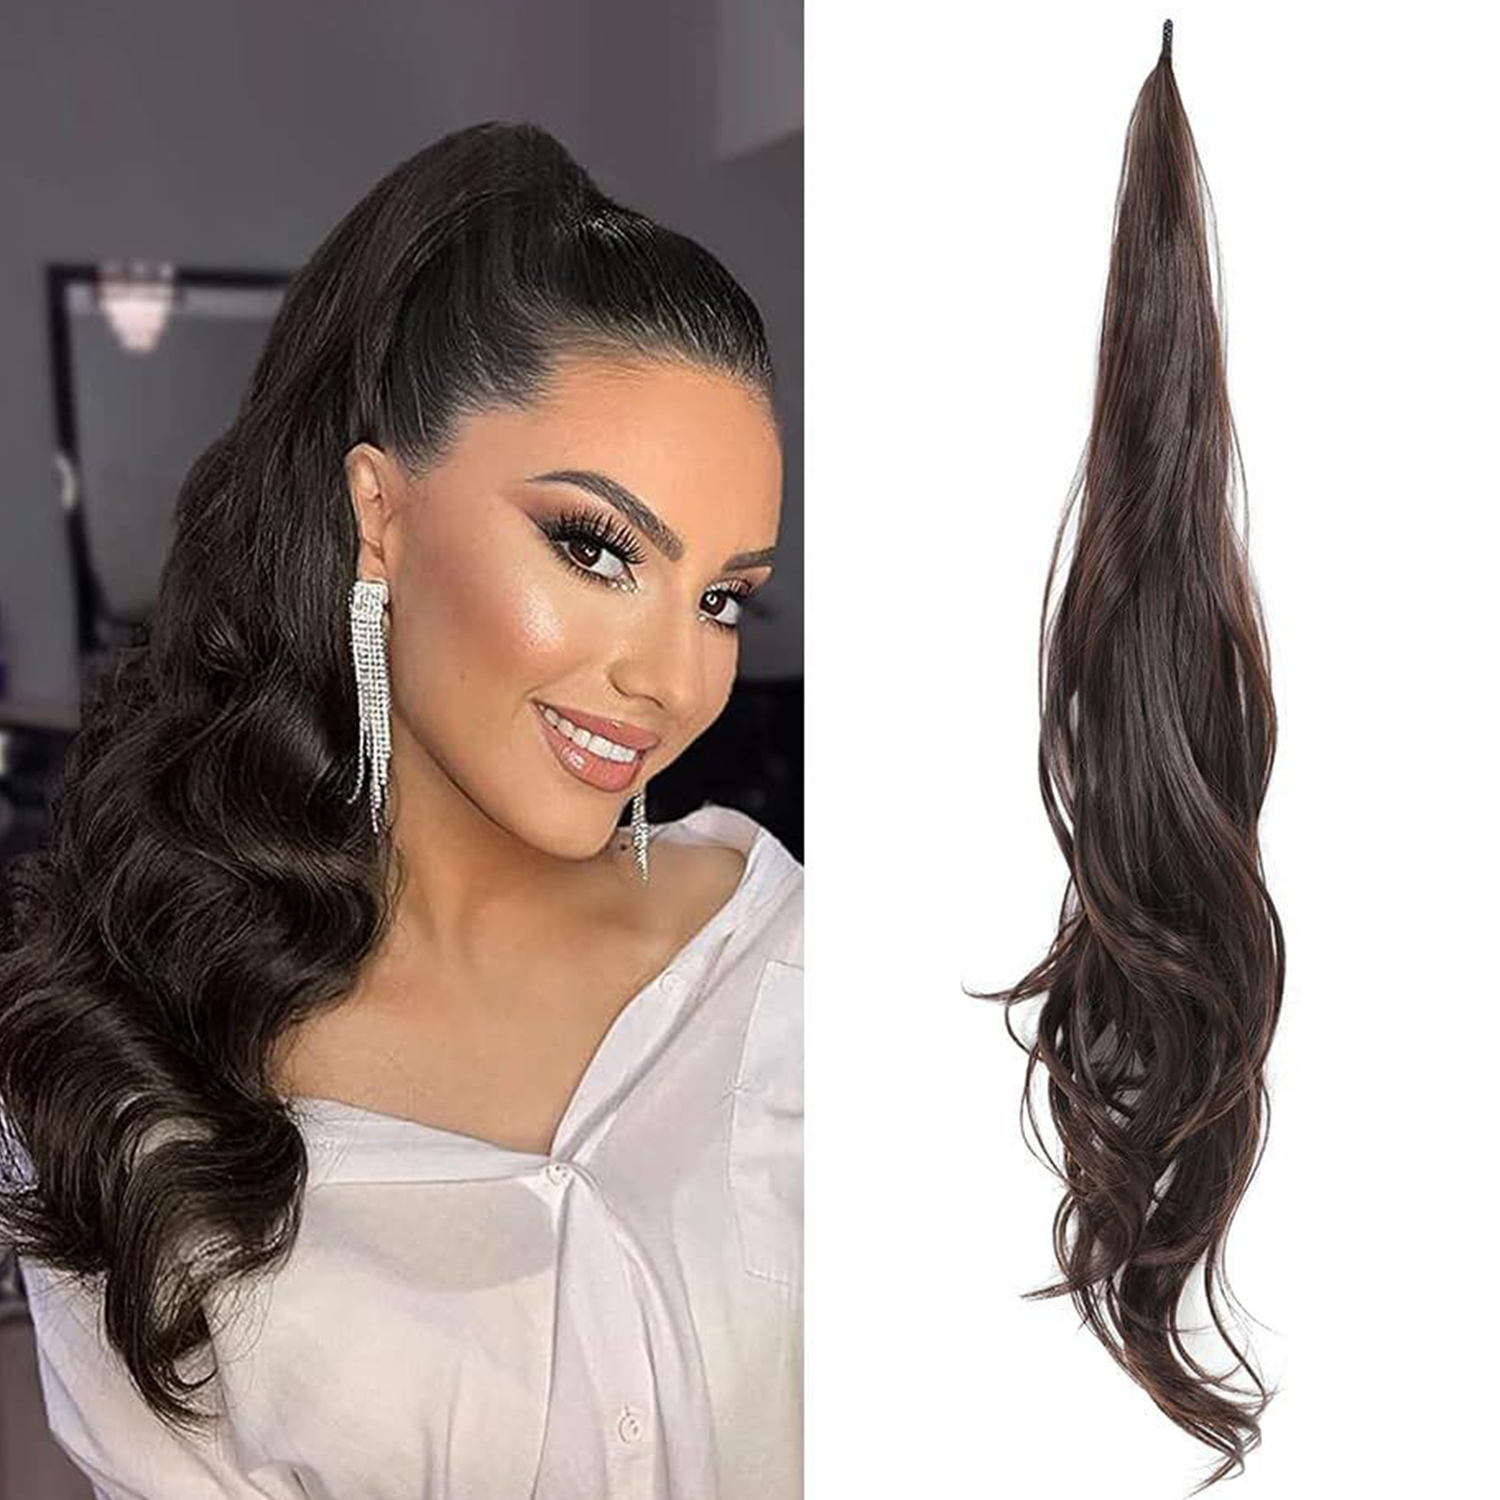 Ponytail Extensions Donker Bruin - Hairextensions - 80 cm